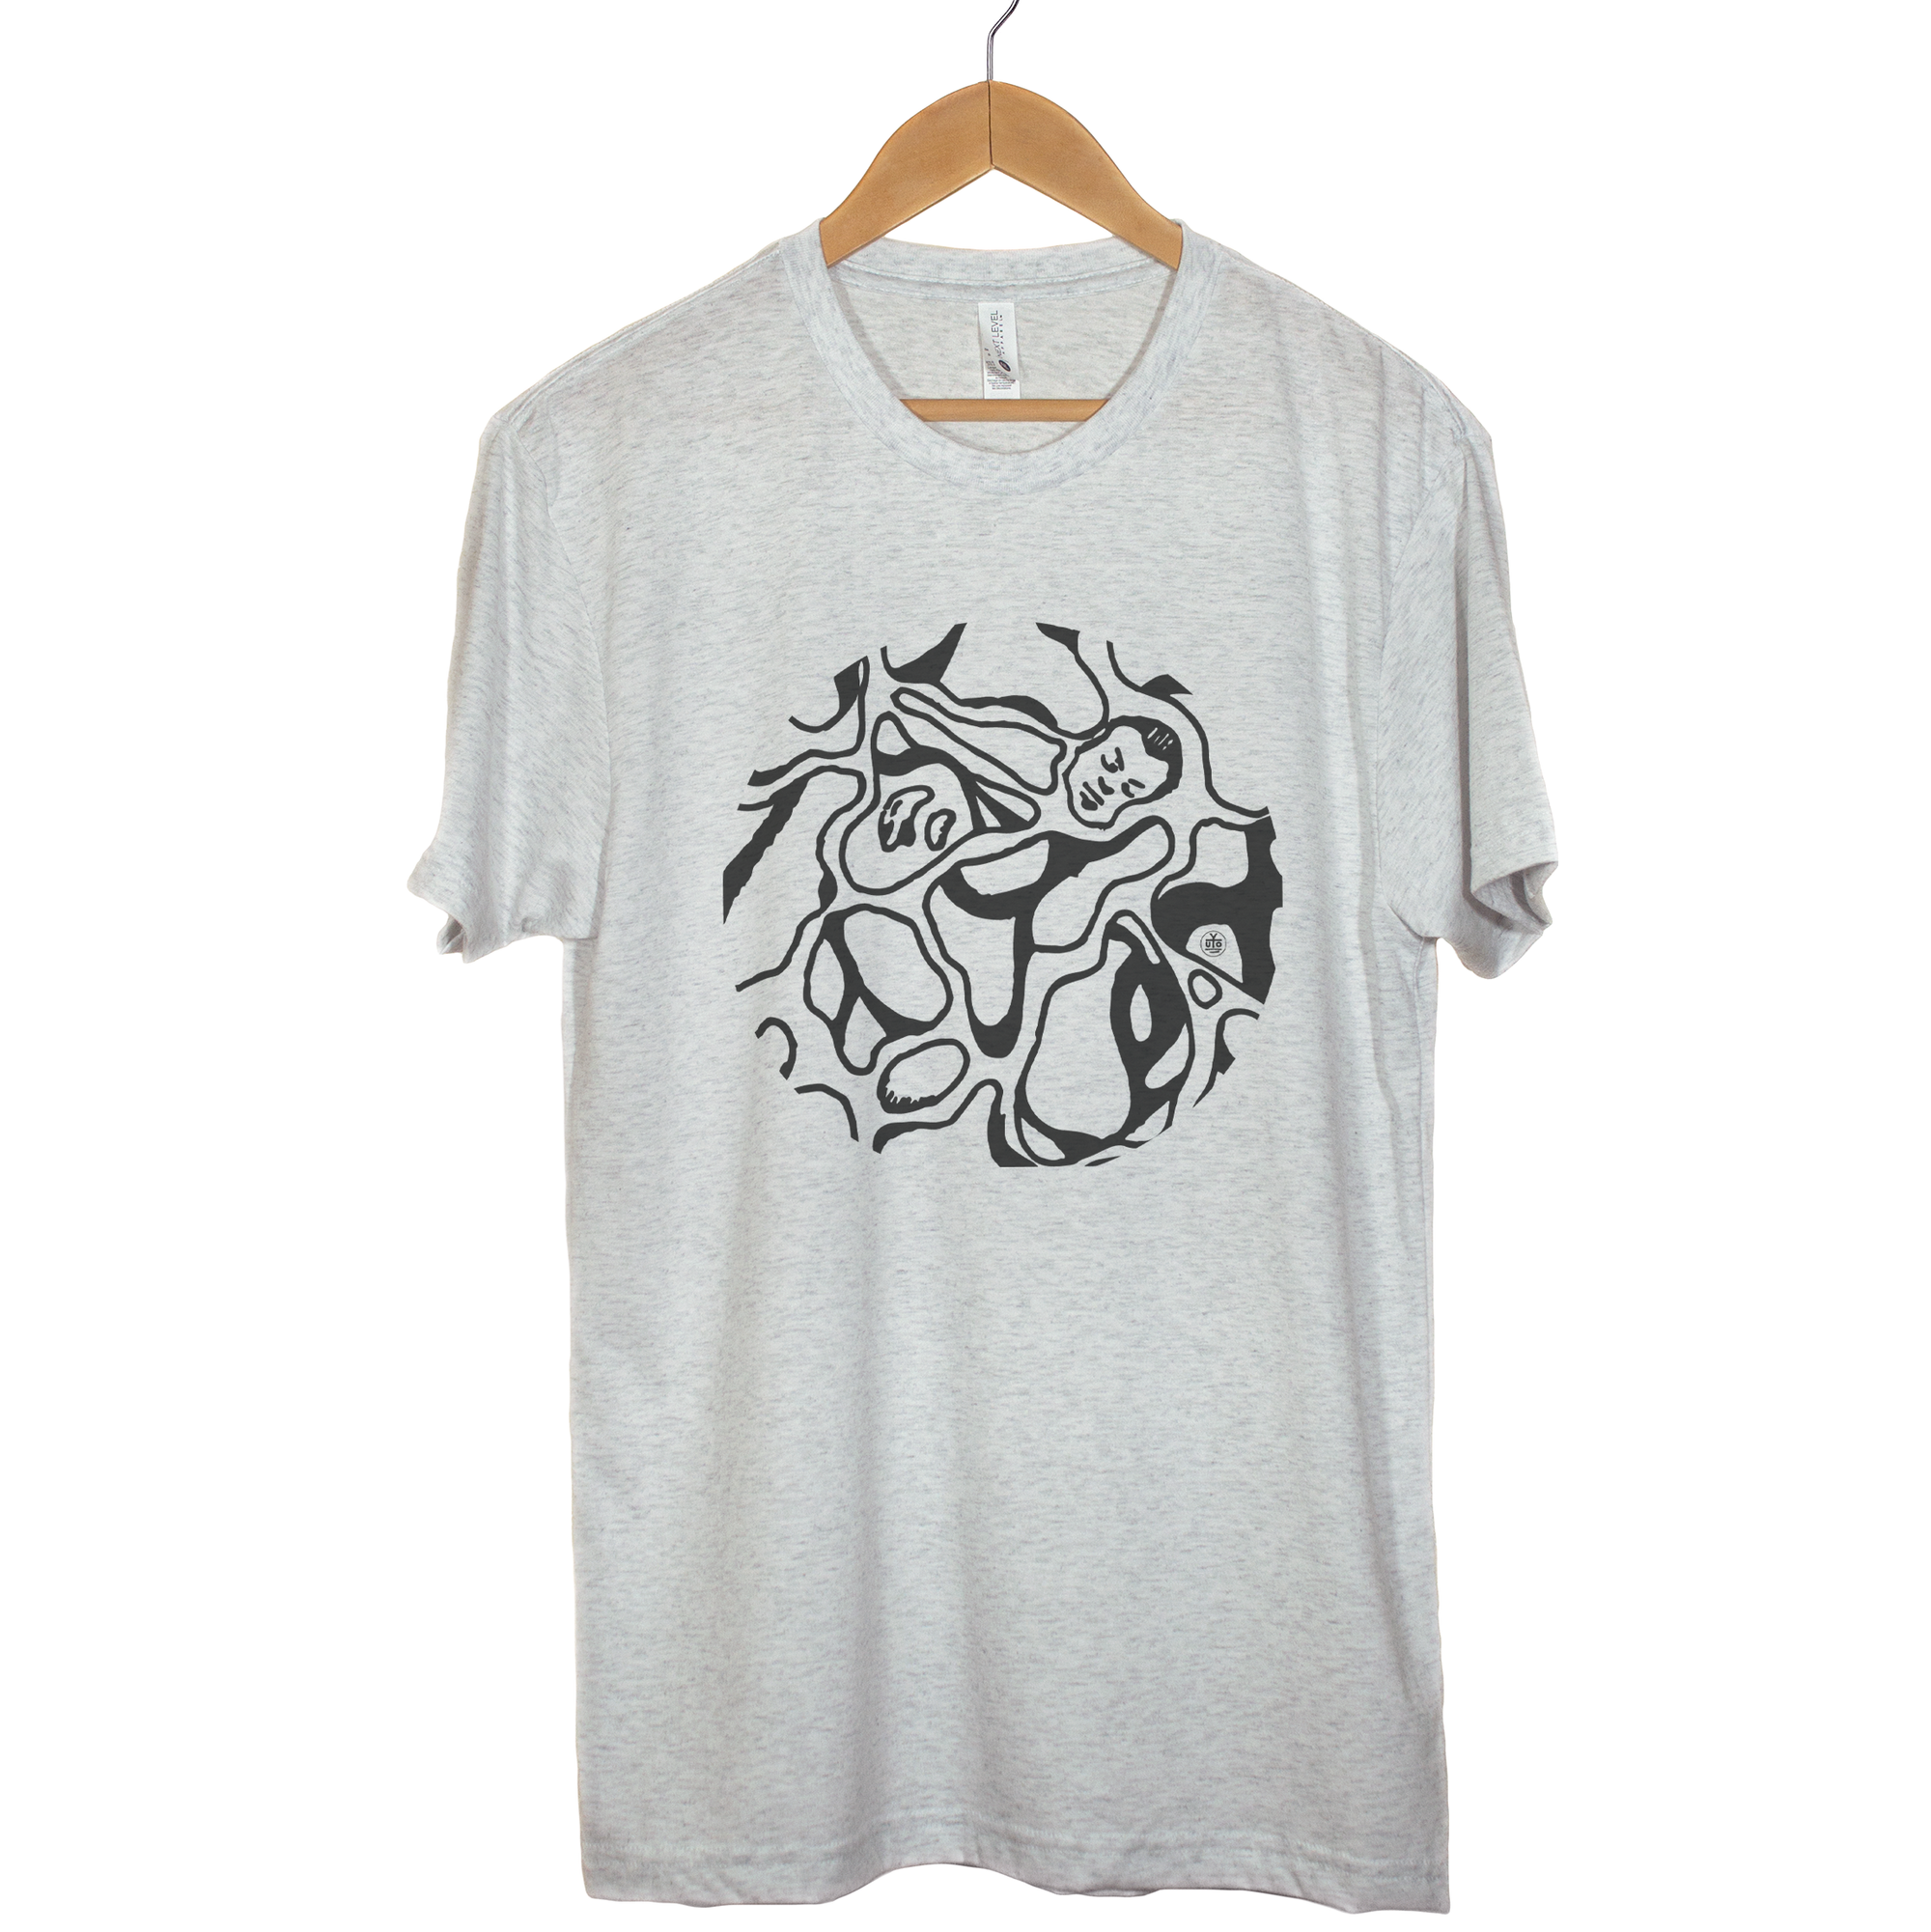 "Rivulets" - Heather/White Triblend Tee